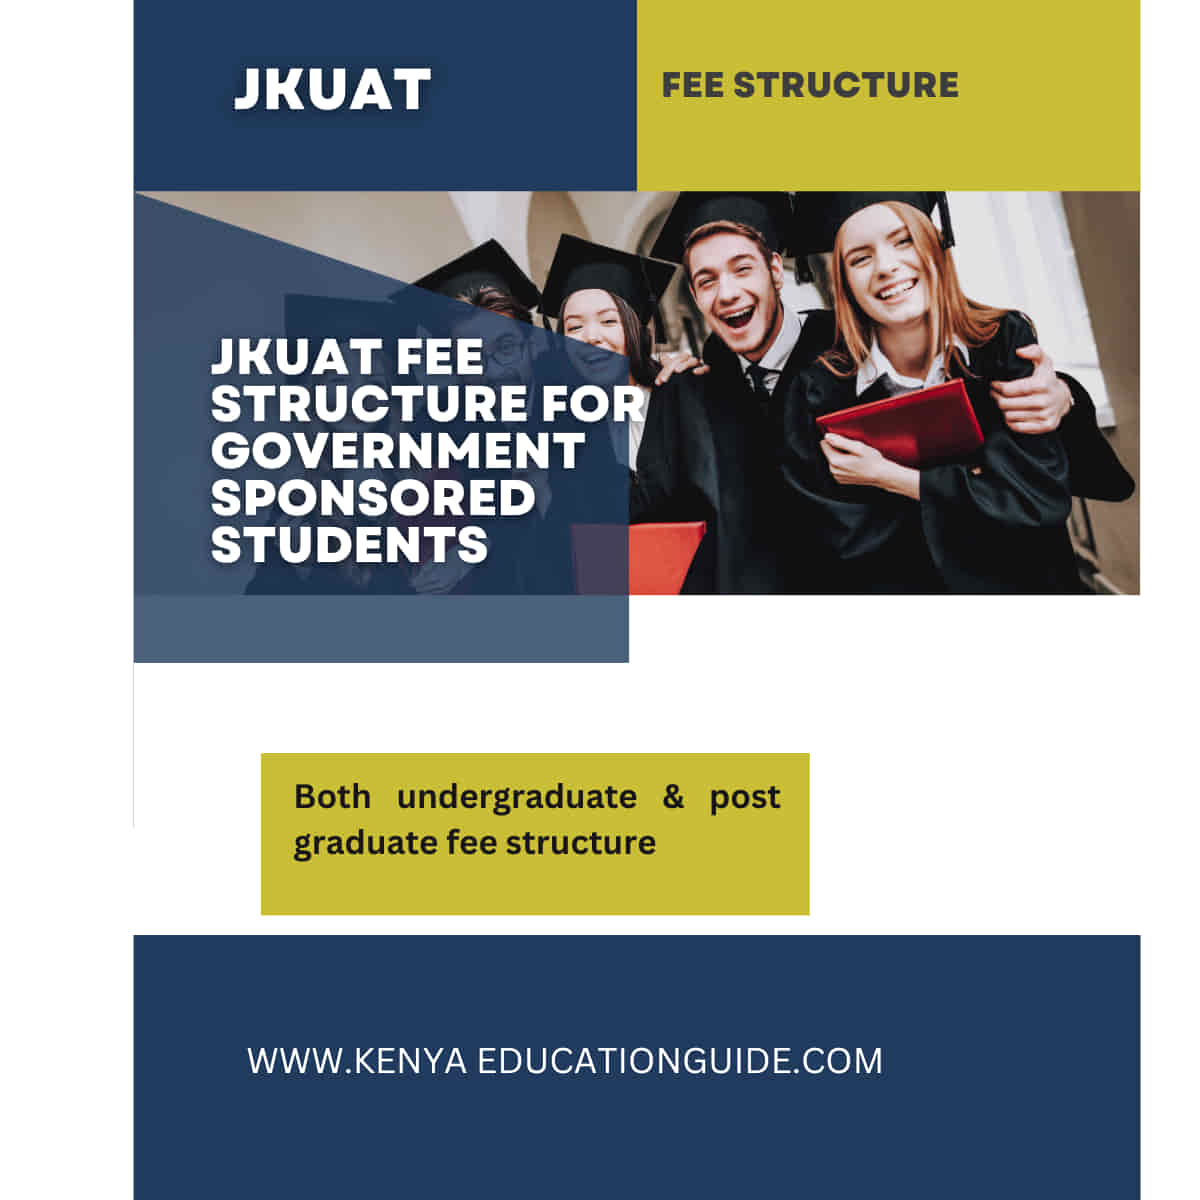 JKUAT fee structure for government sponsored students